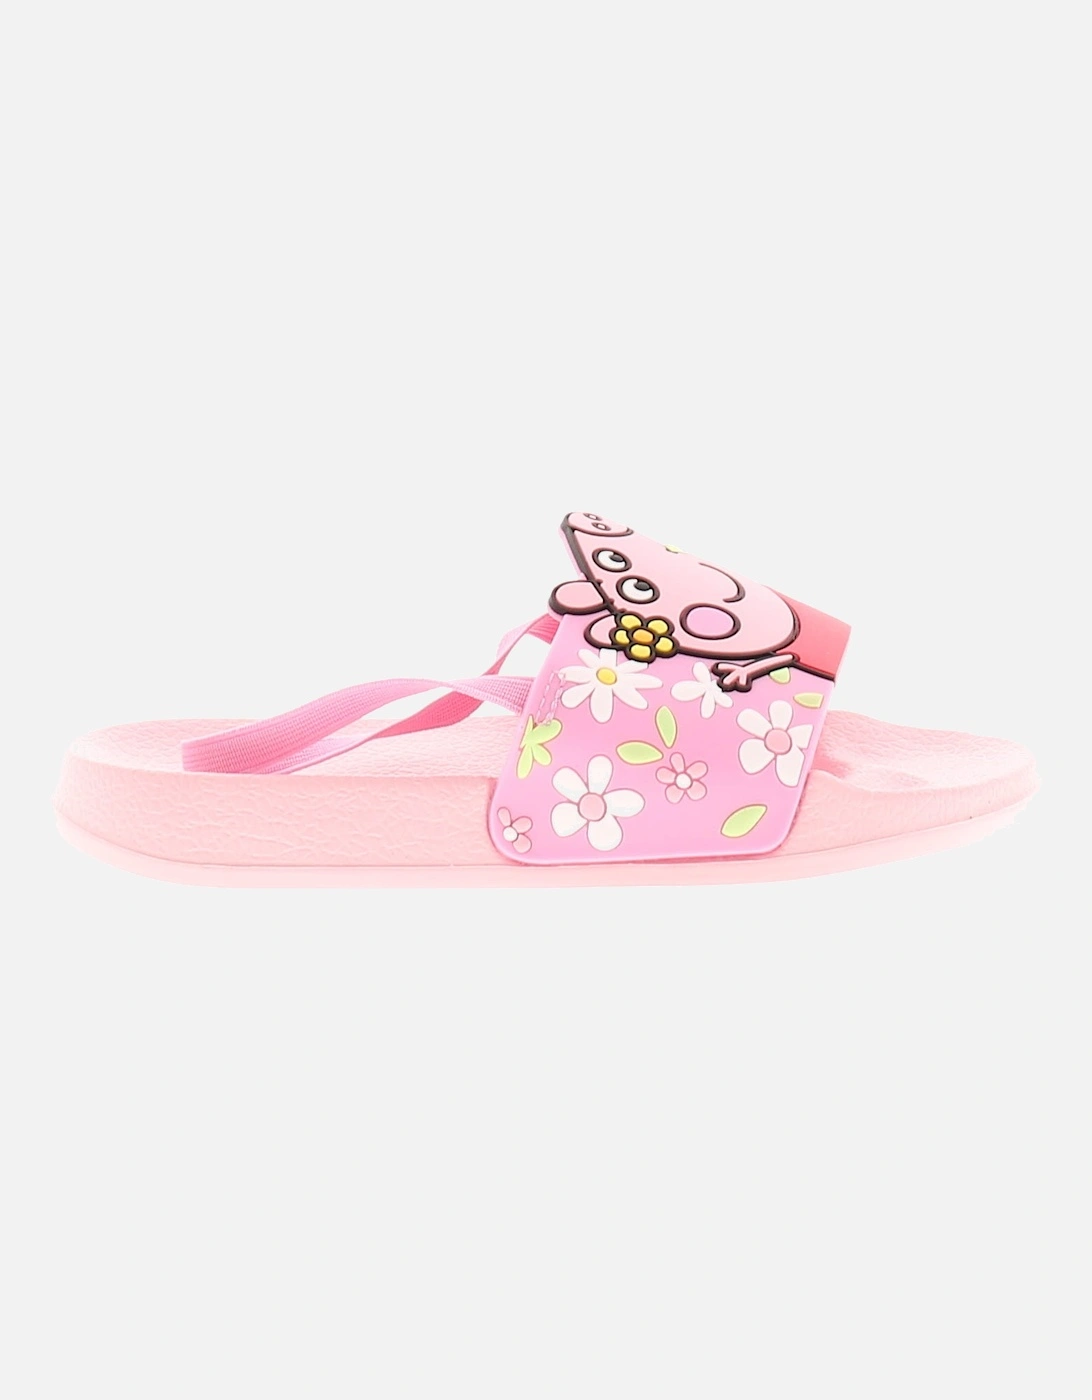 Younger Girls Sandals Slide Sliders Beach Pool Flowers Pink UK Size